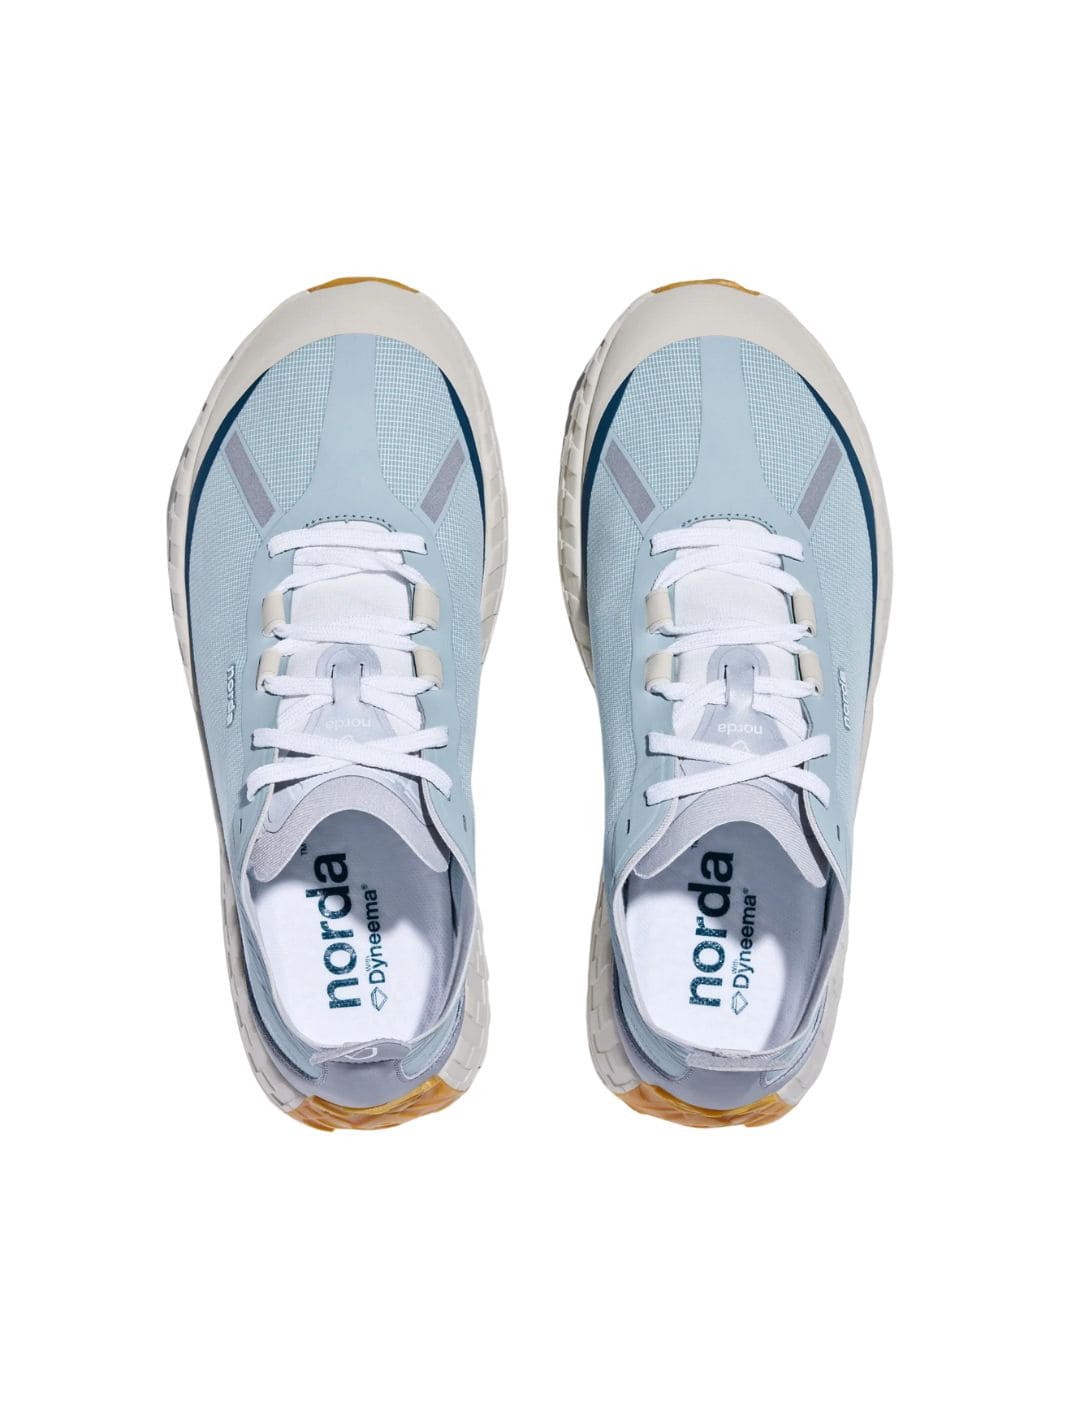 Norda Shoes Sneakers | 001 Ether